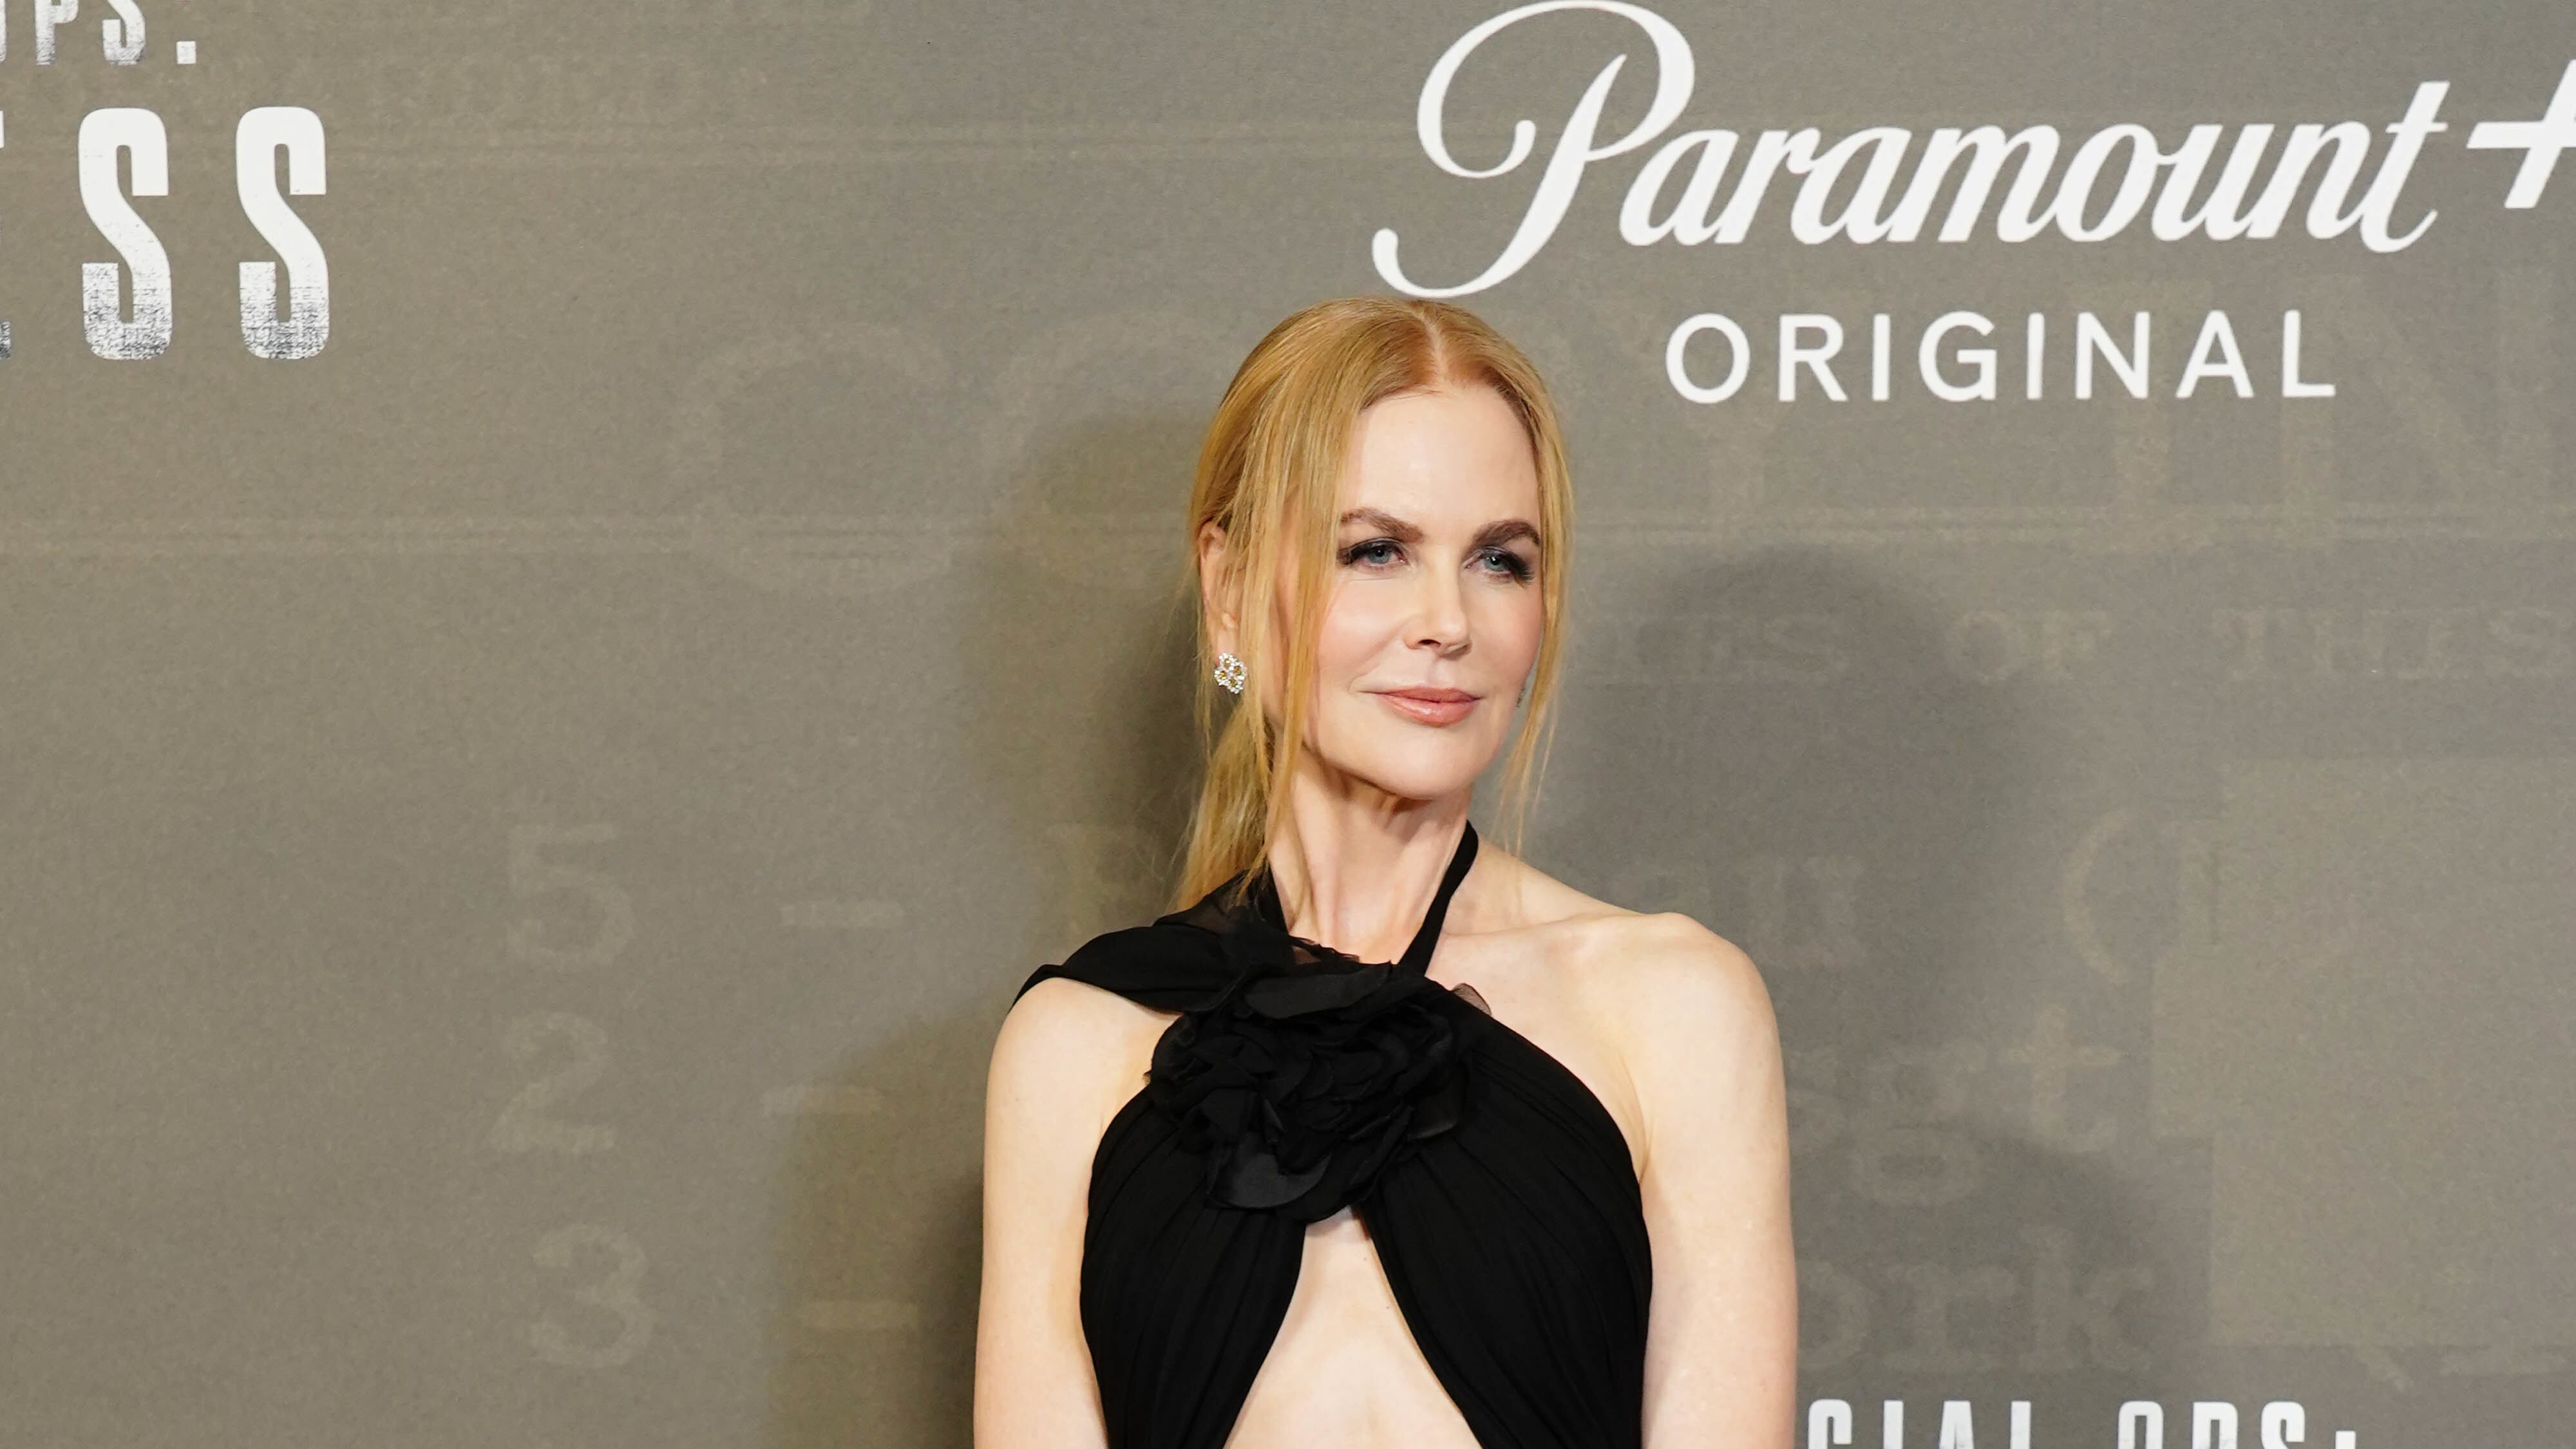 Nicole Kidman was the first Australian actor to receive the accolade